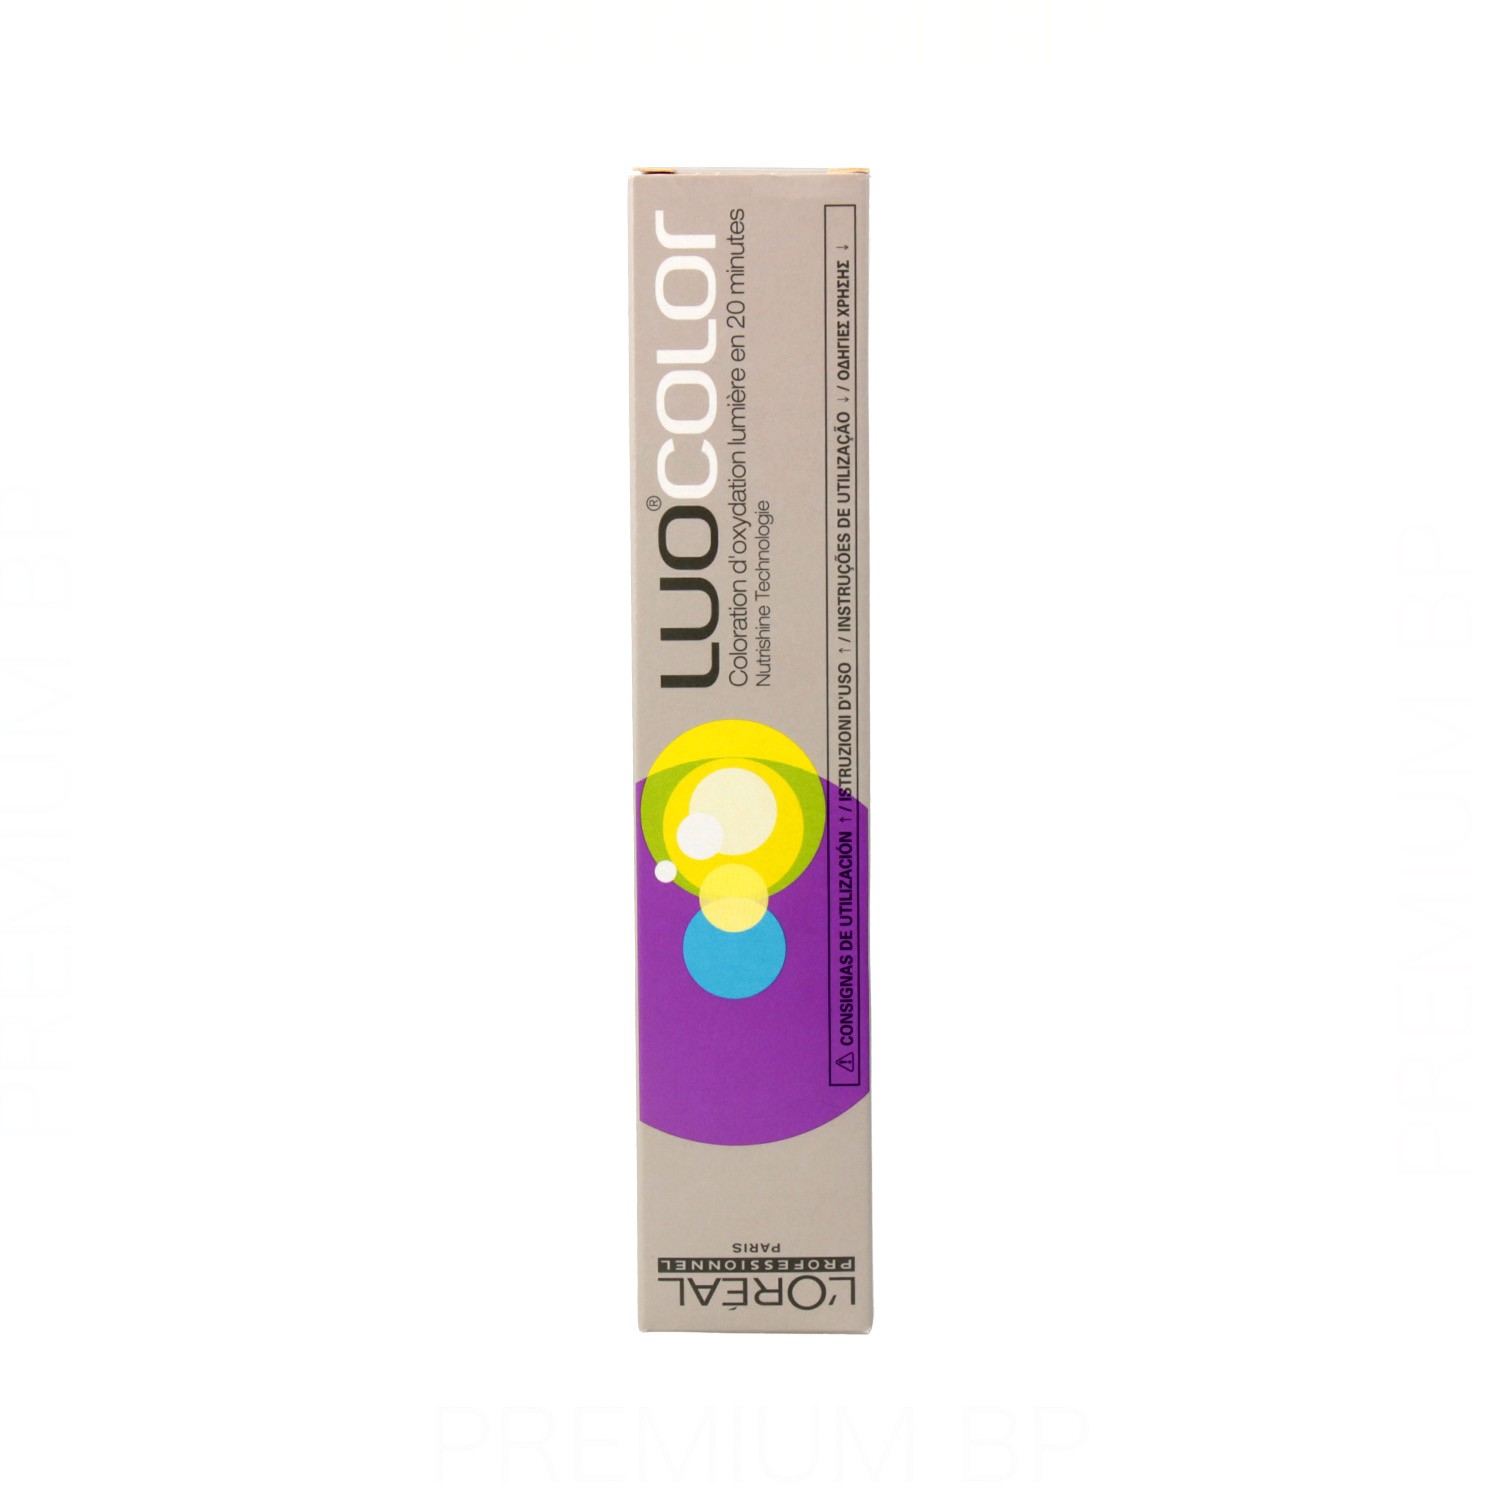 Loreal Luo Color 6,07